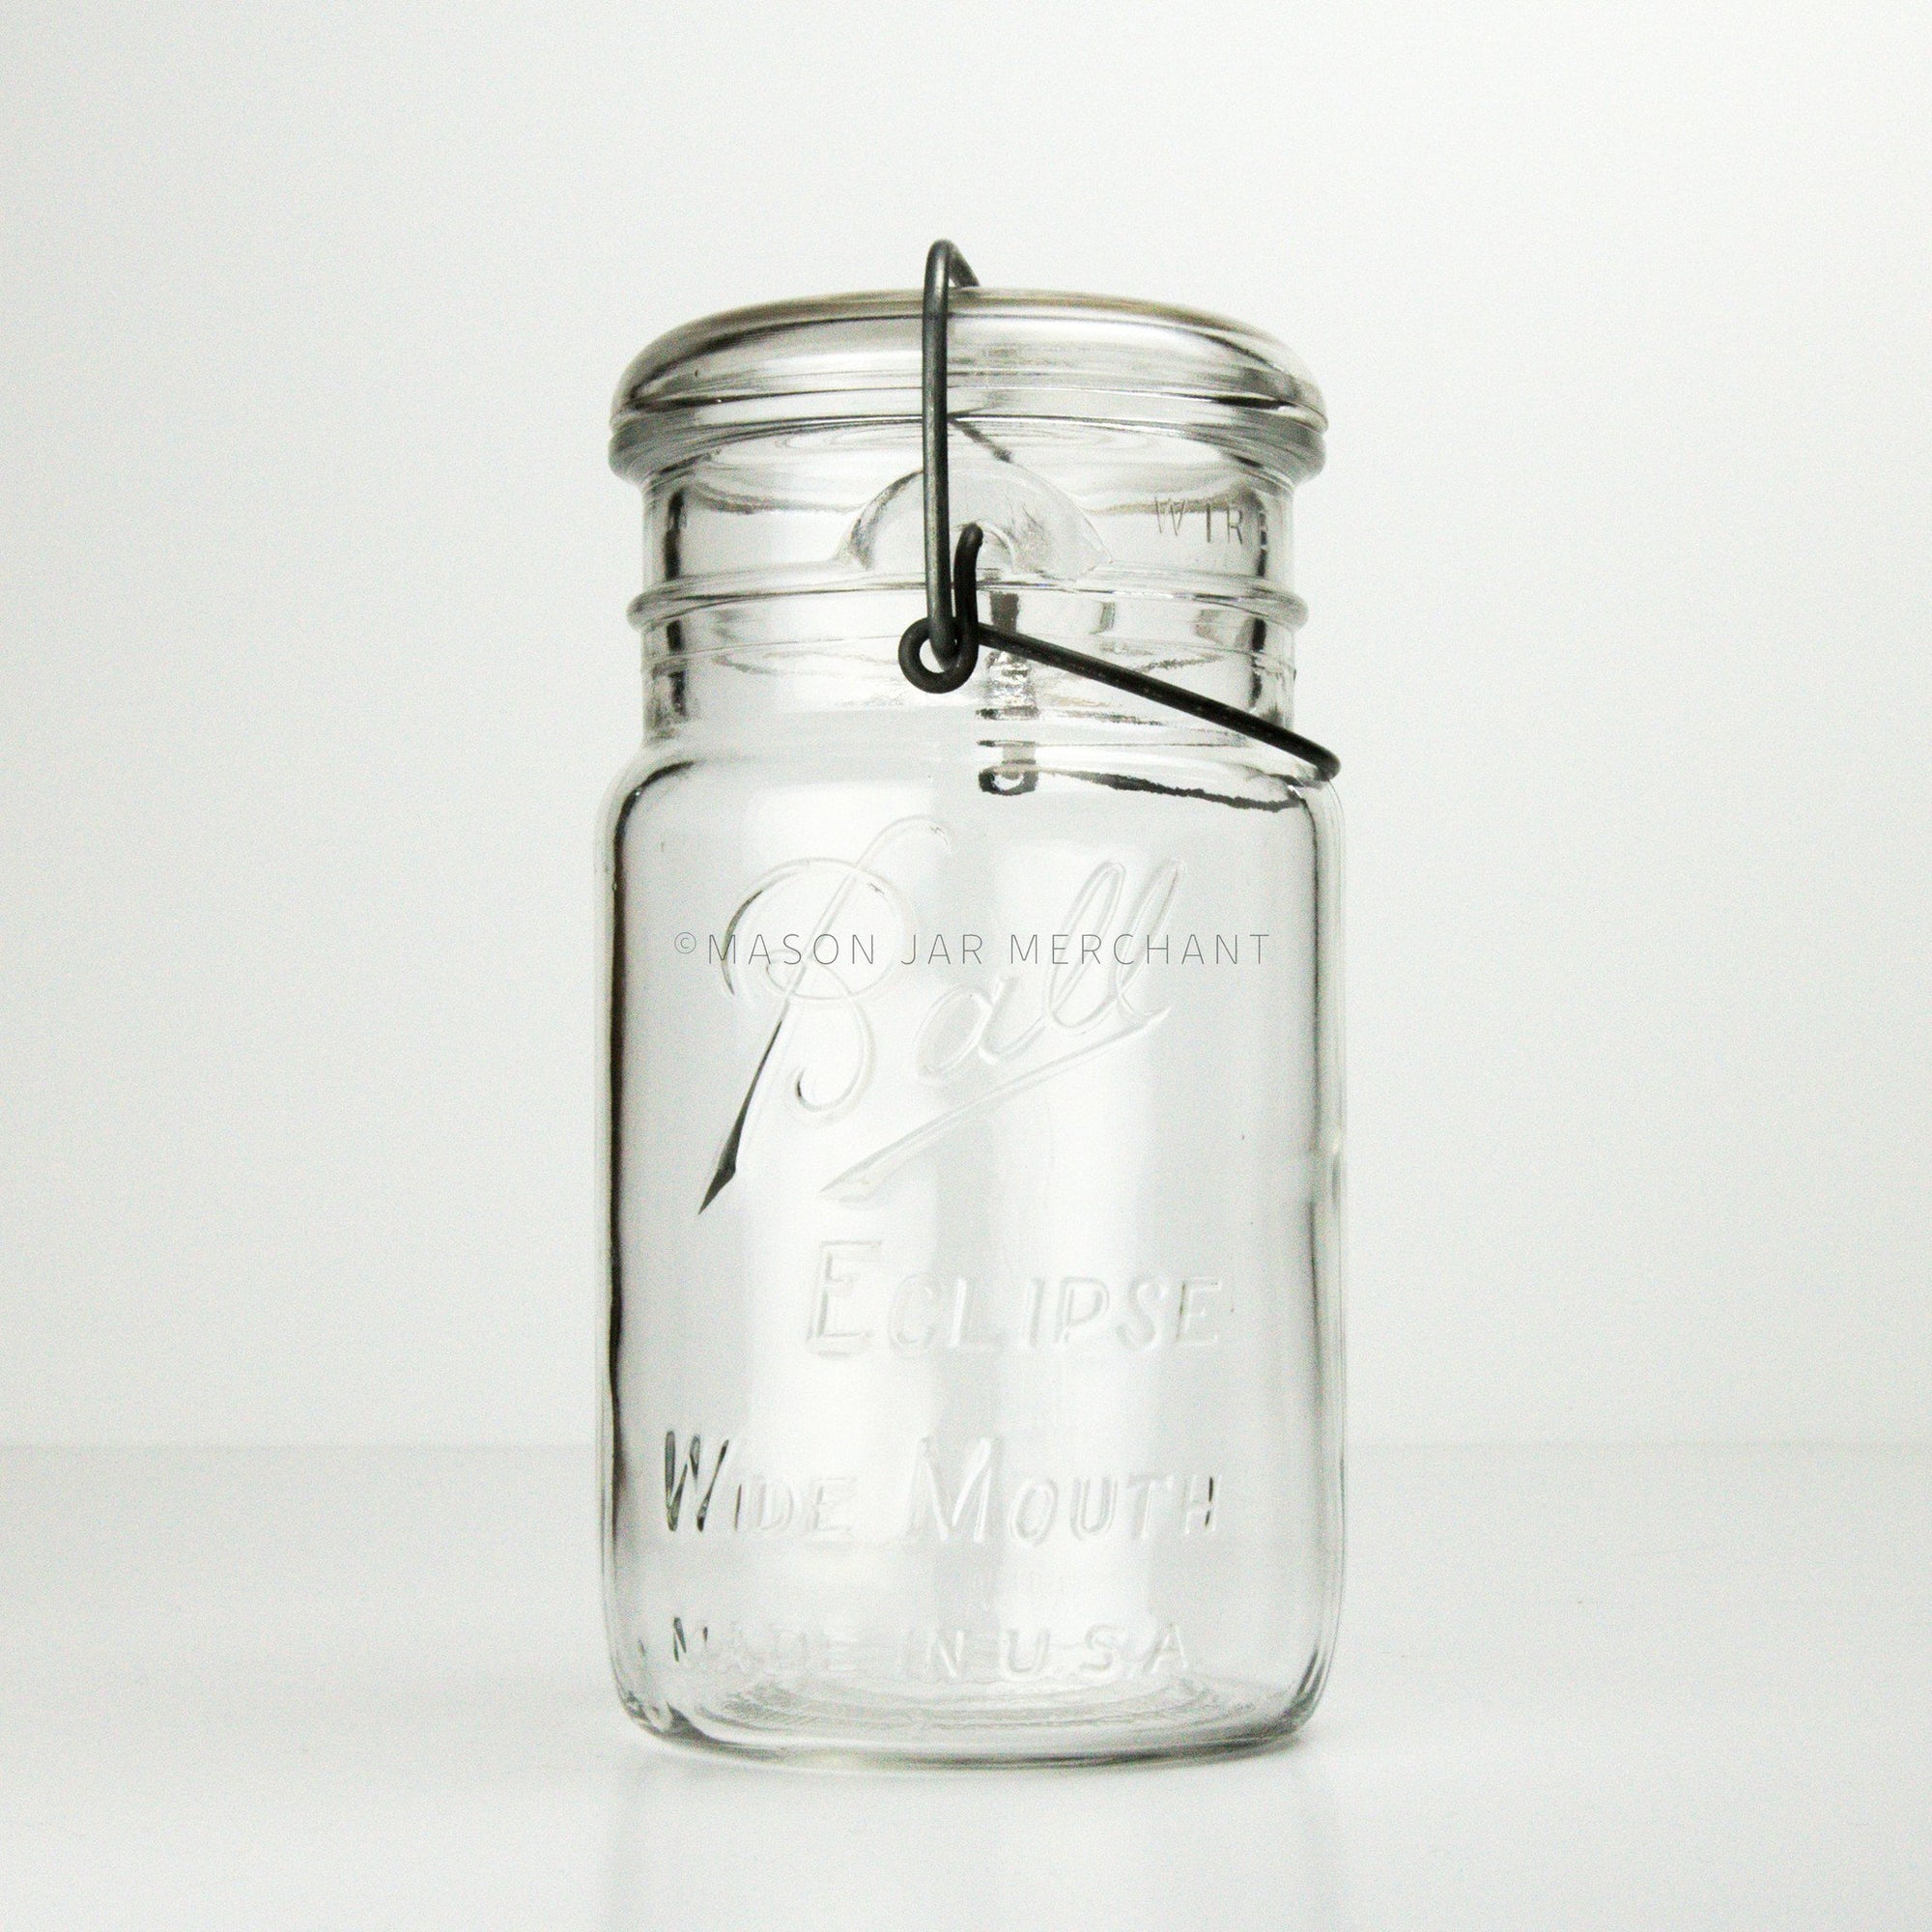 Vintage wire bail and glass lid quart mason jar with Ball Eclipse logo